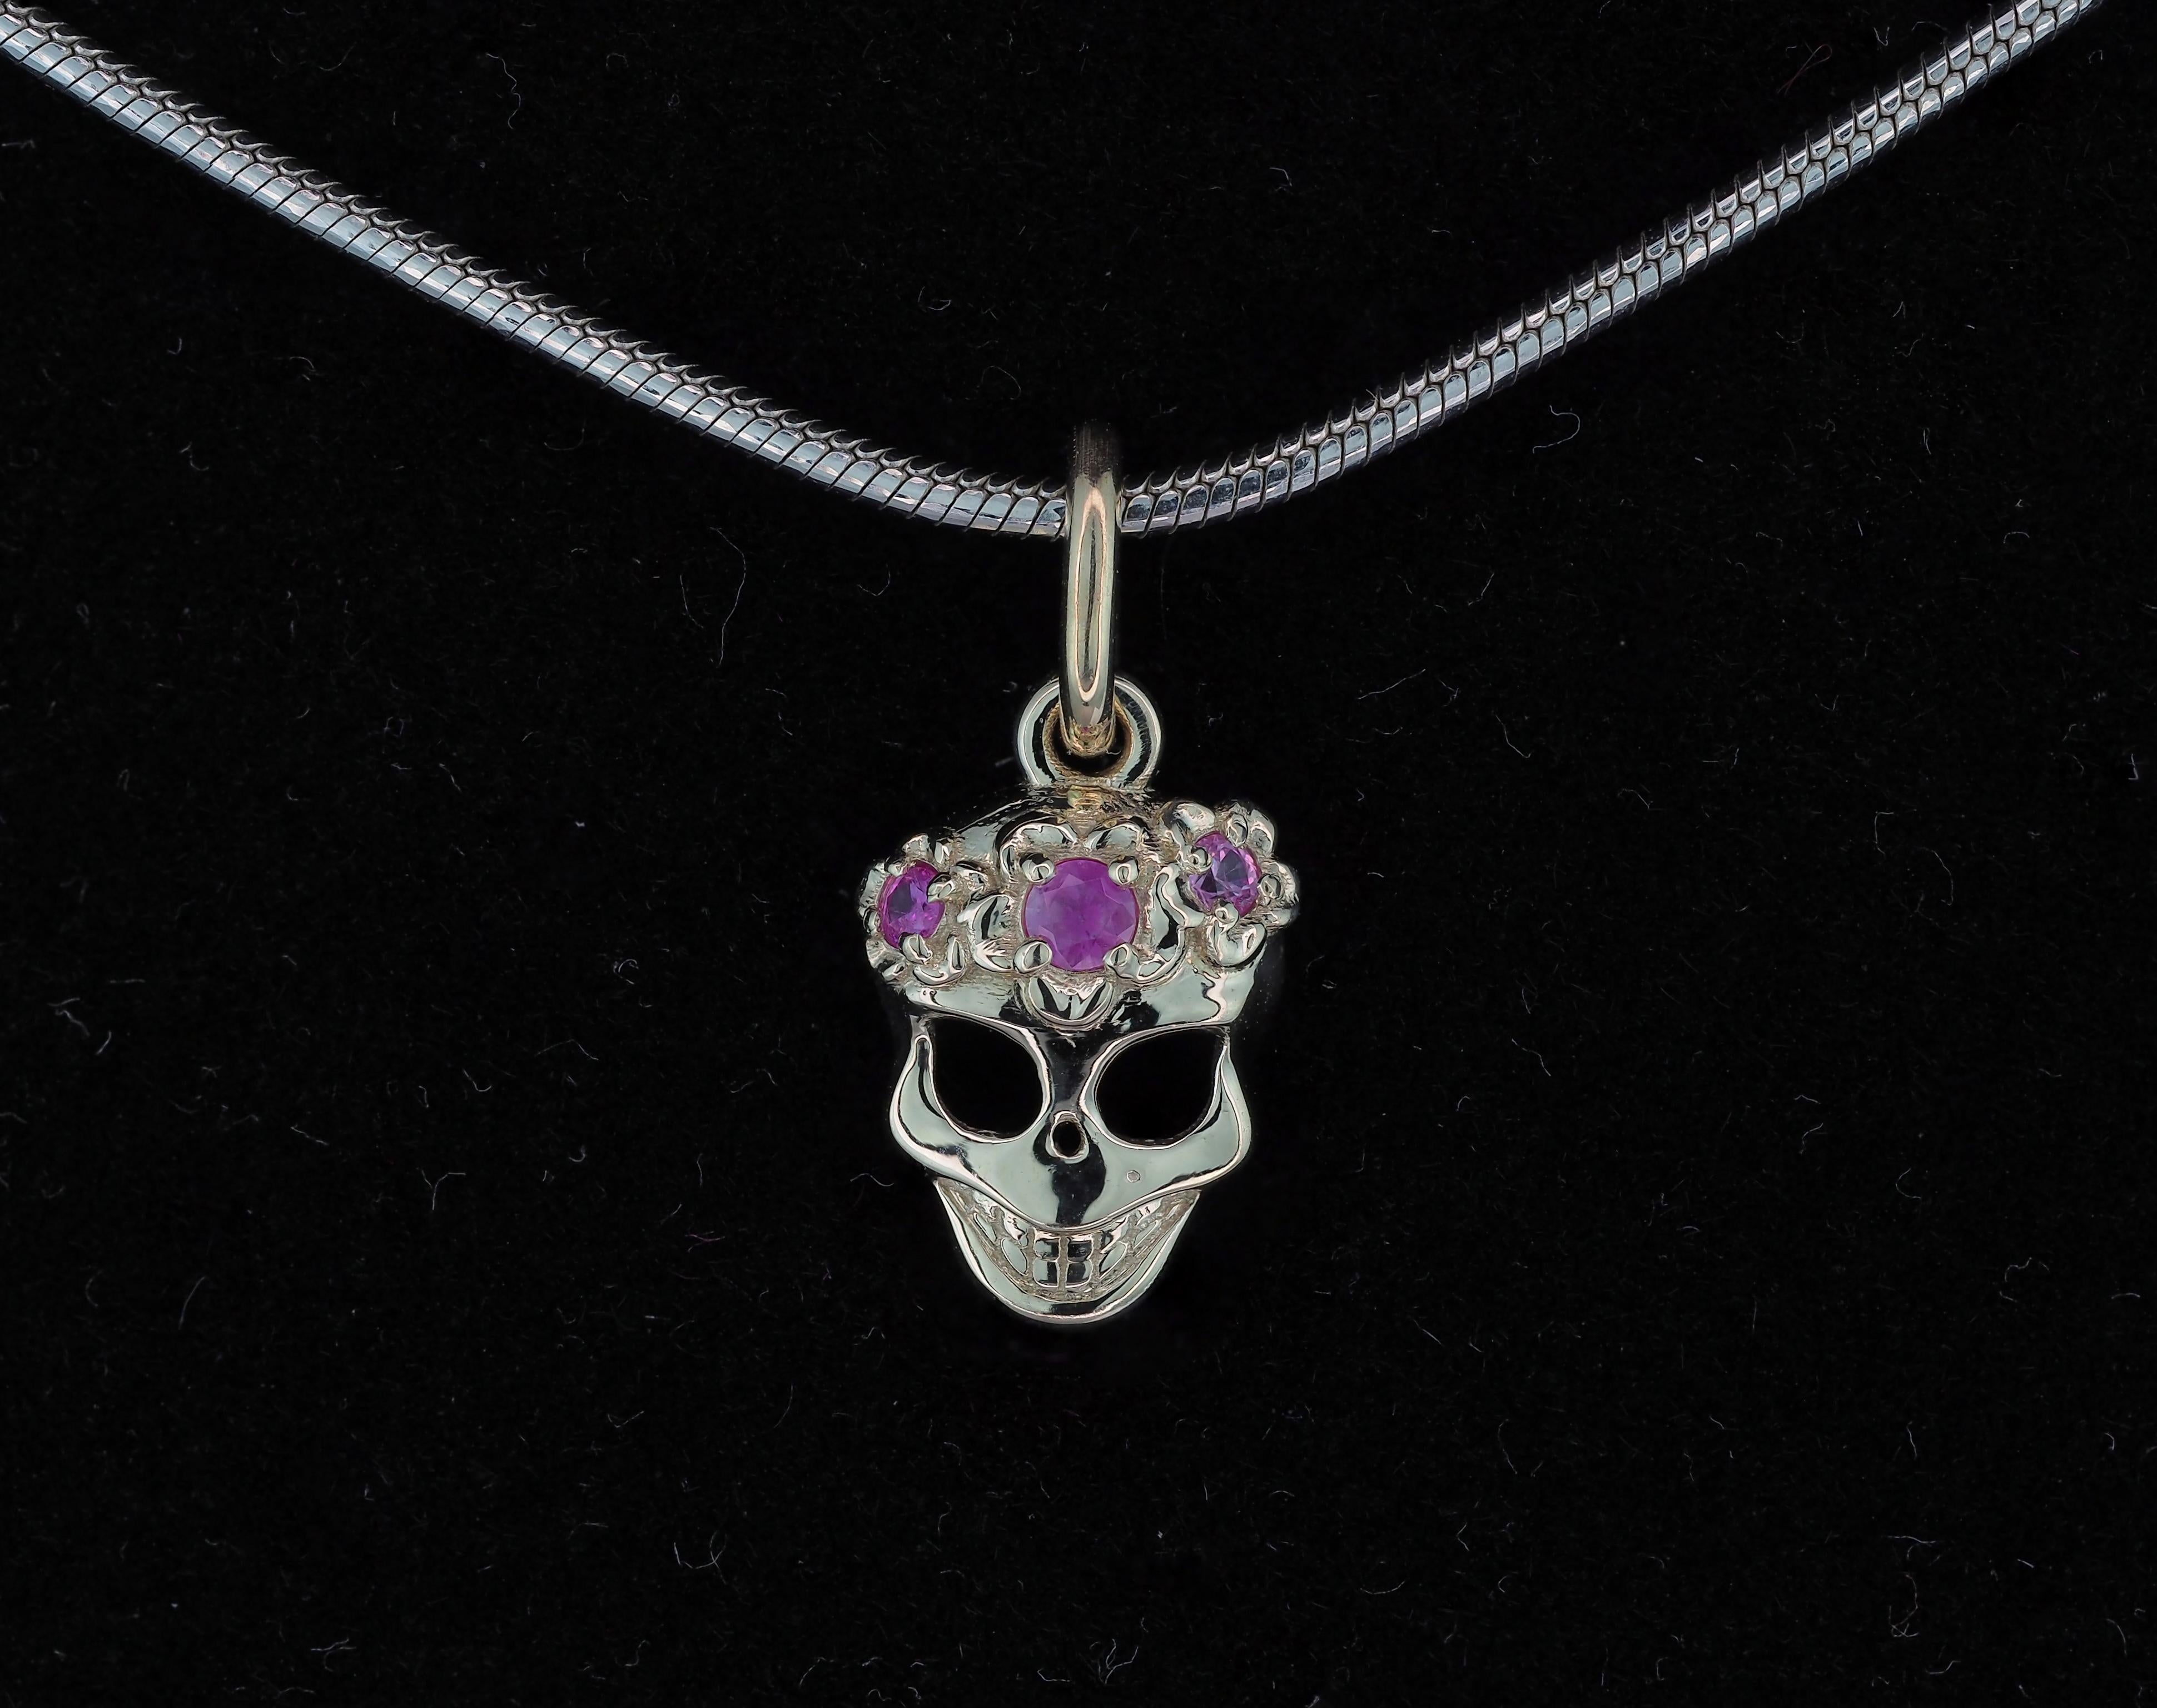 14k Gold Skull Pendant with Flowers with Sapphires For Sale 4